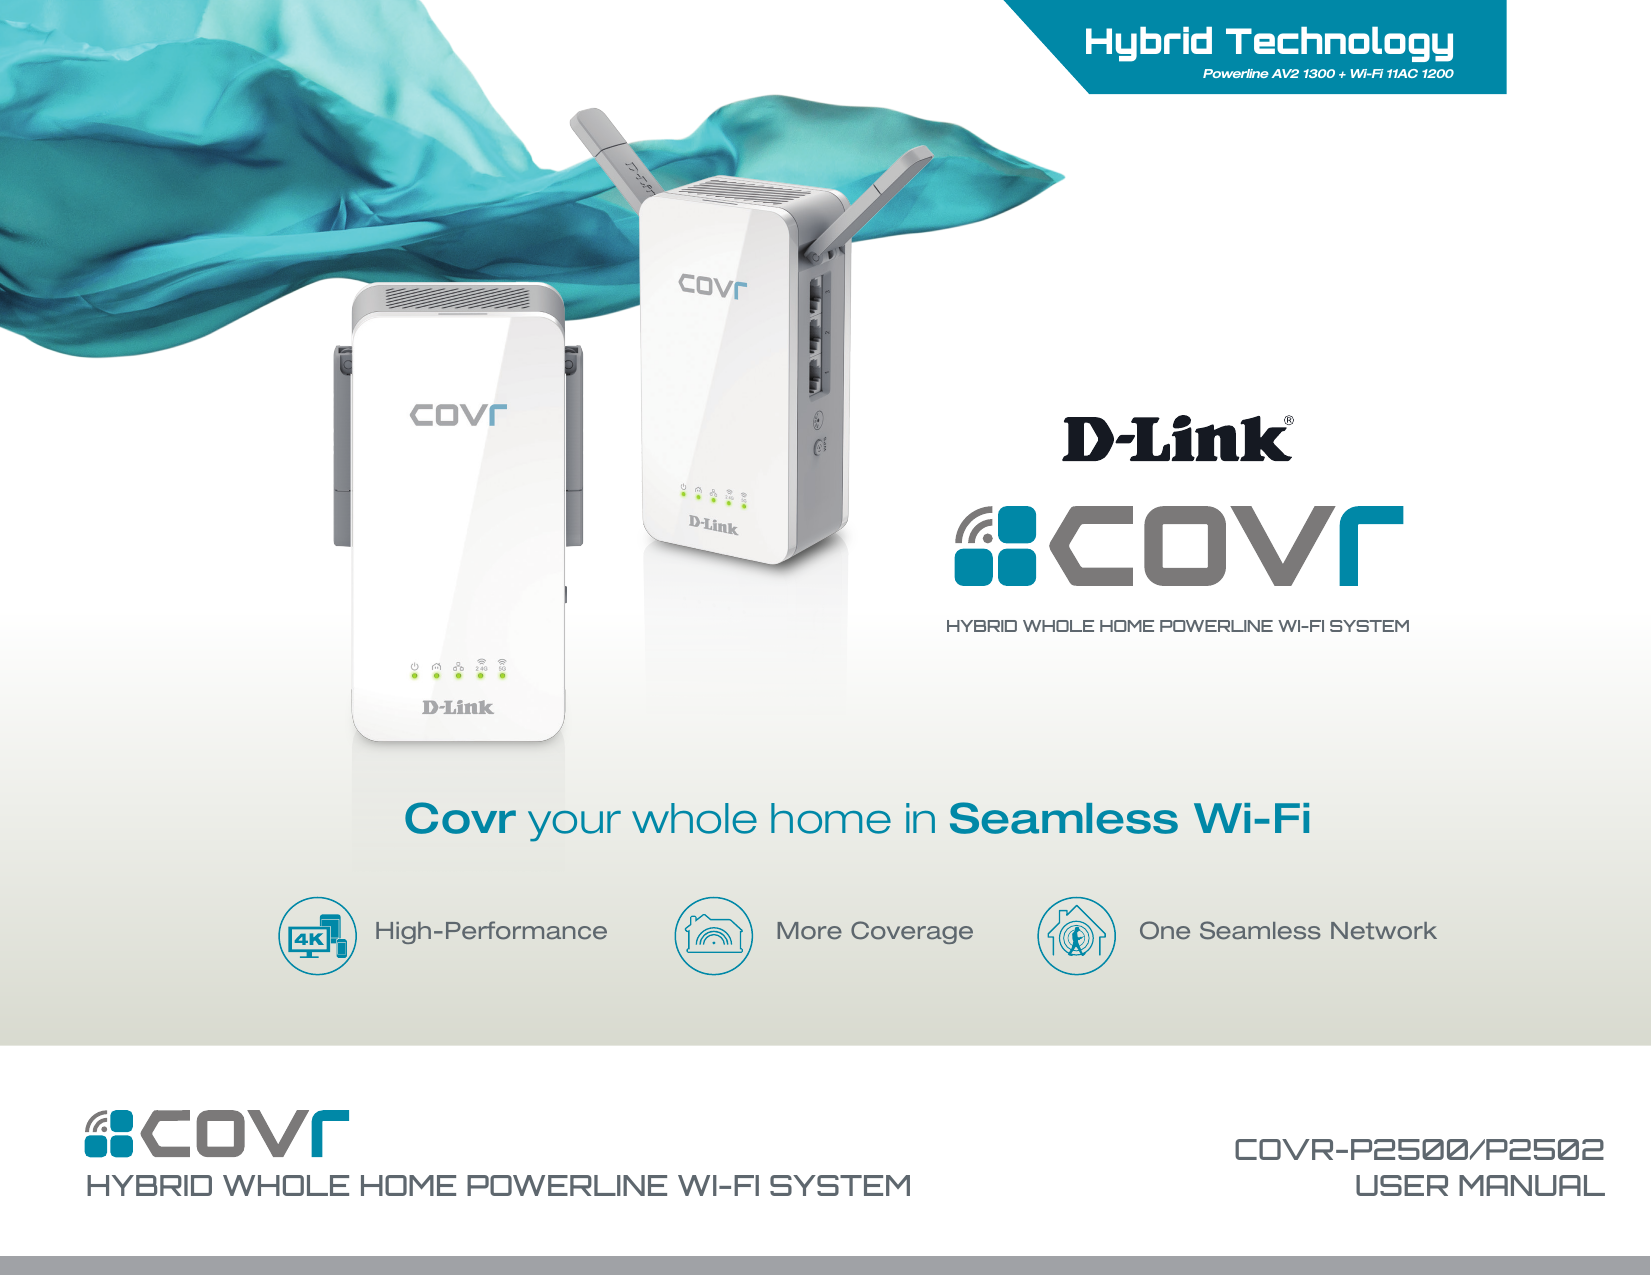 HYBRID WHOLE HOME POWERLINE WI-FI SYSTEMCOVR-P2500/P2502USER MANUALCovr your whole home in Seamless Wi-FiHybrid TechnologyPowerline AV2 1300 + Wi-Fi 11AC 1200HYBRID WHOLE HOME POWERLINE WI-FI SYSTEMOne Seamless NetworkMore CoverageHigh-Performance